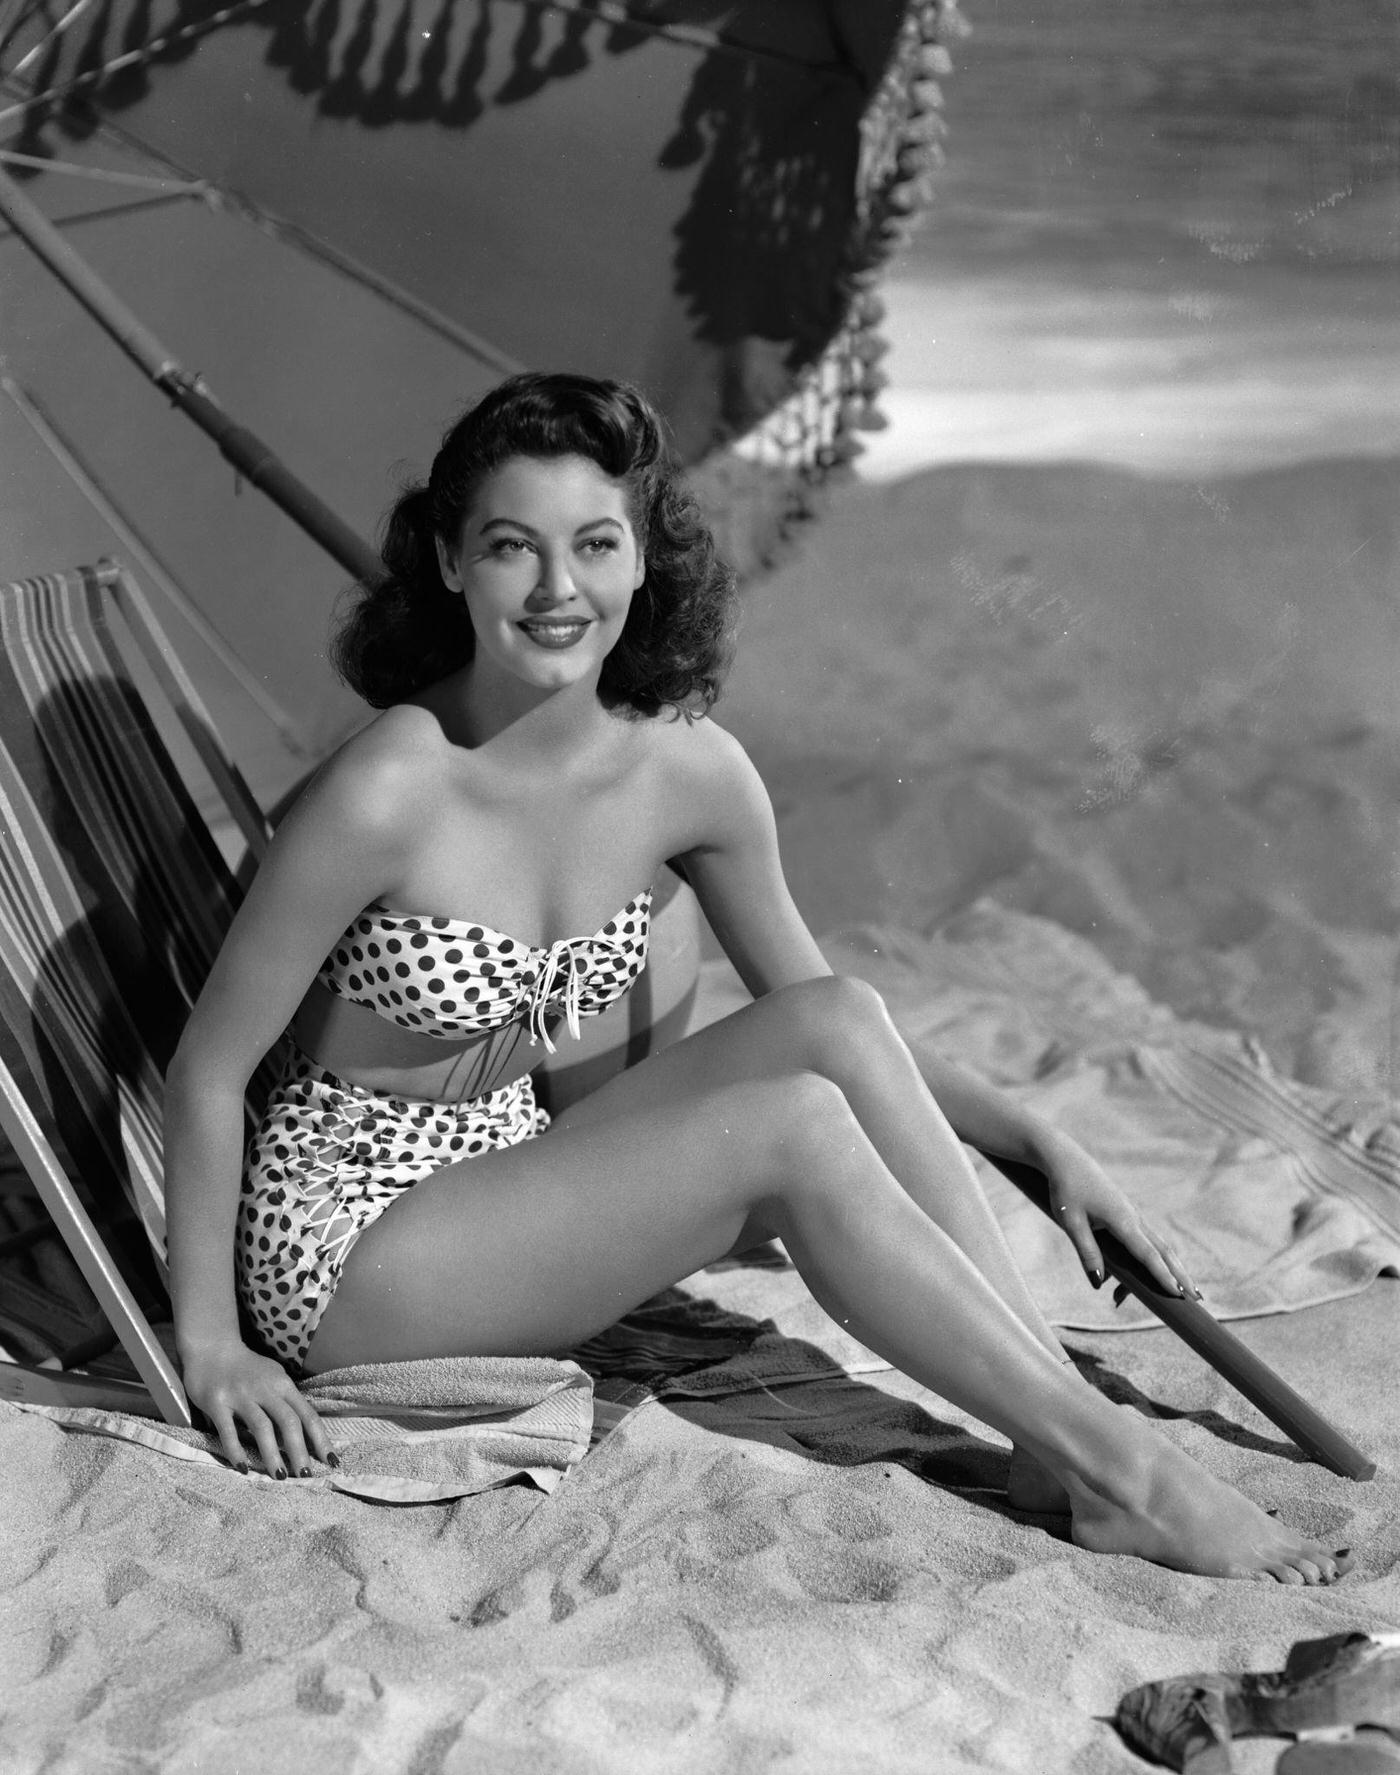 Ava Gardner lounging on the beach in a spotted bikini, December 1944.